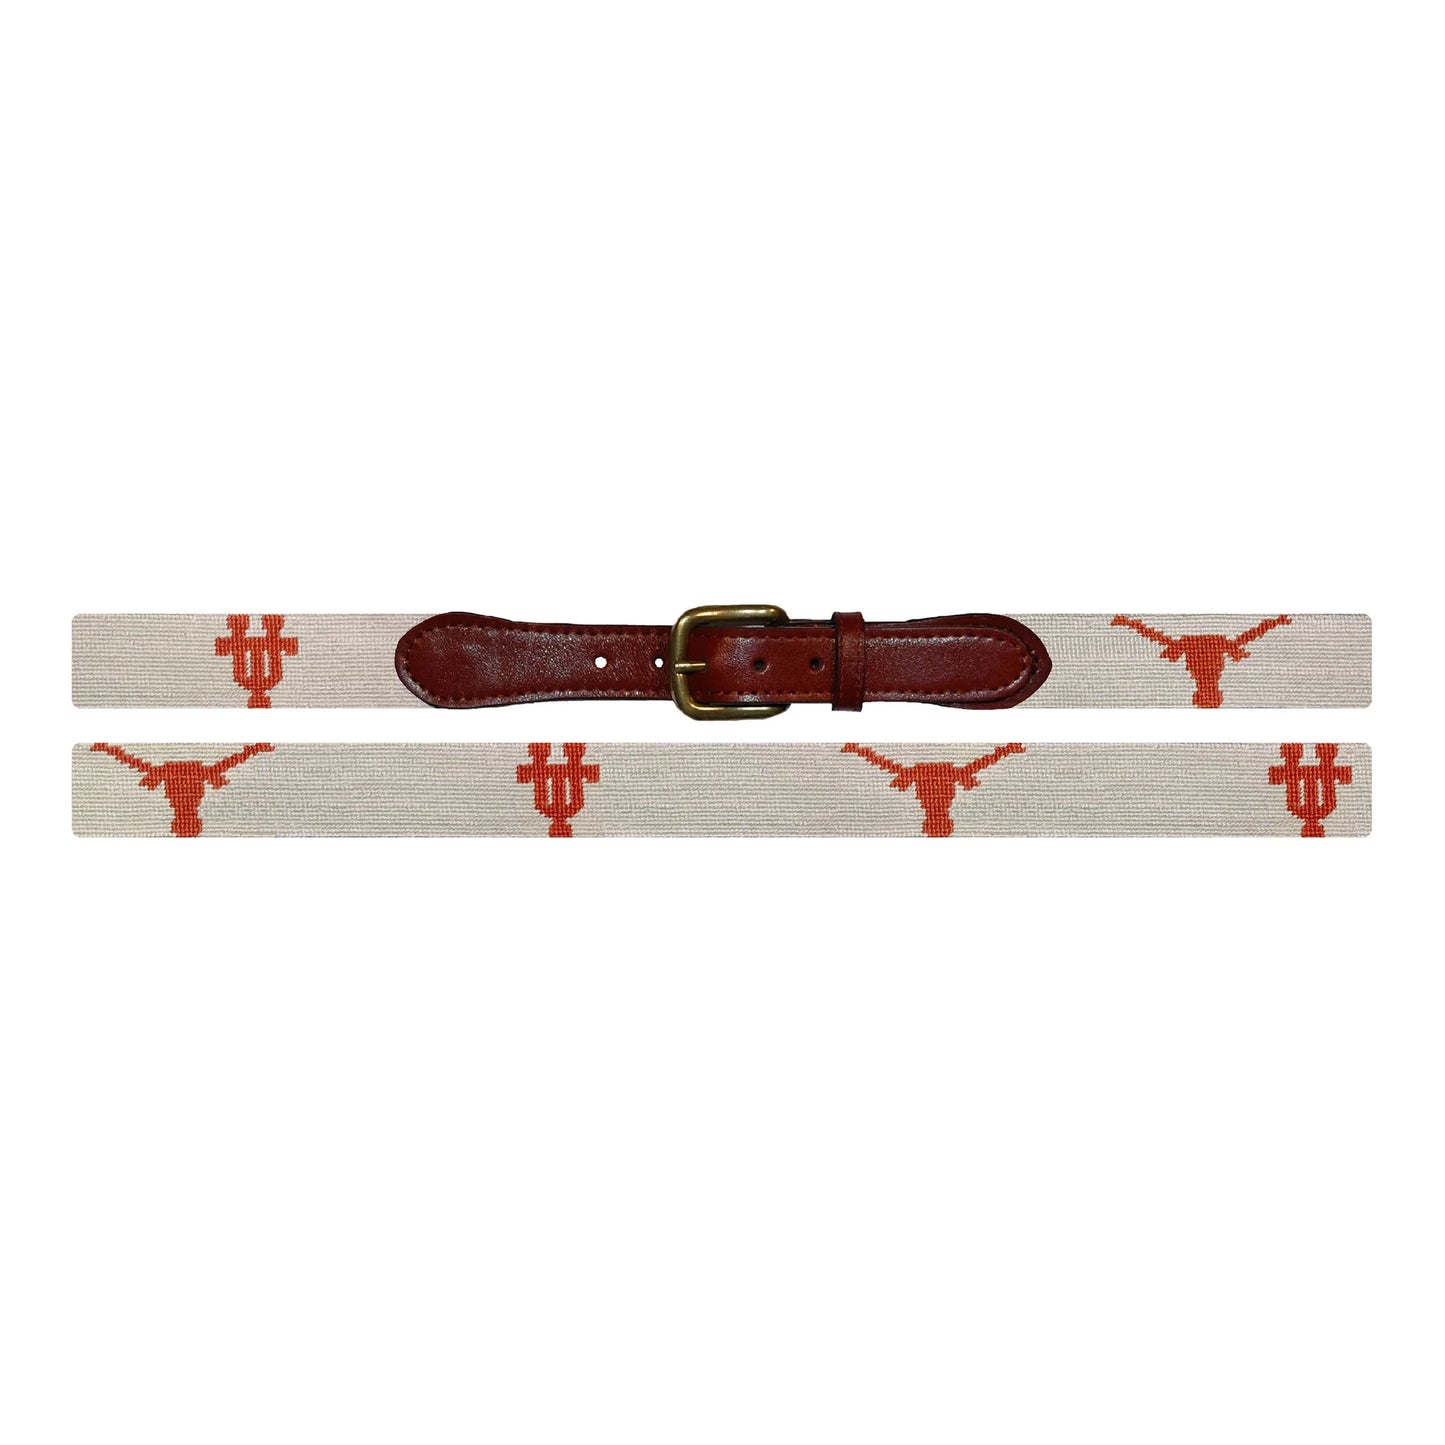 Needlepoint Belt - CALL TO SPECIAL ORDER